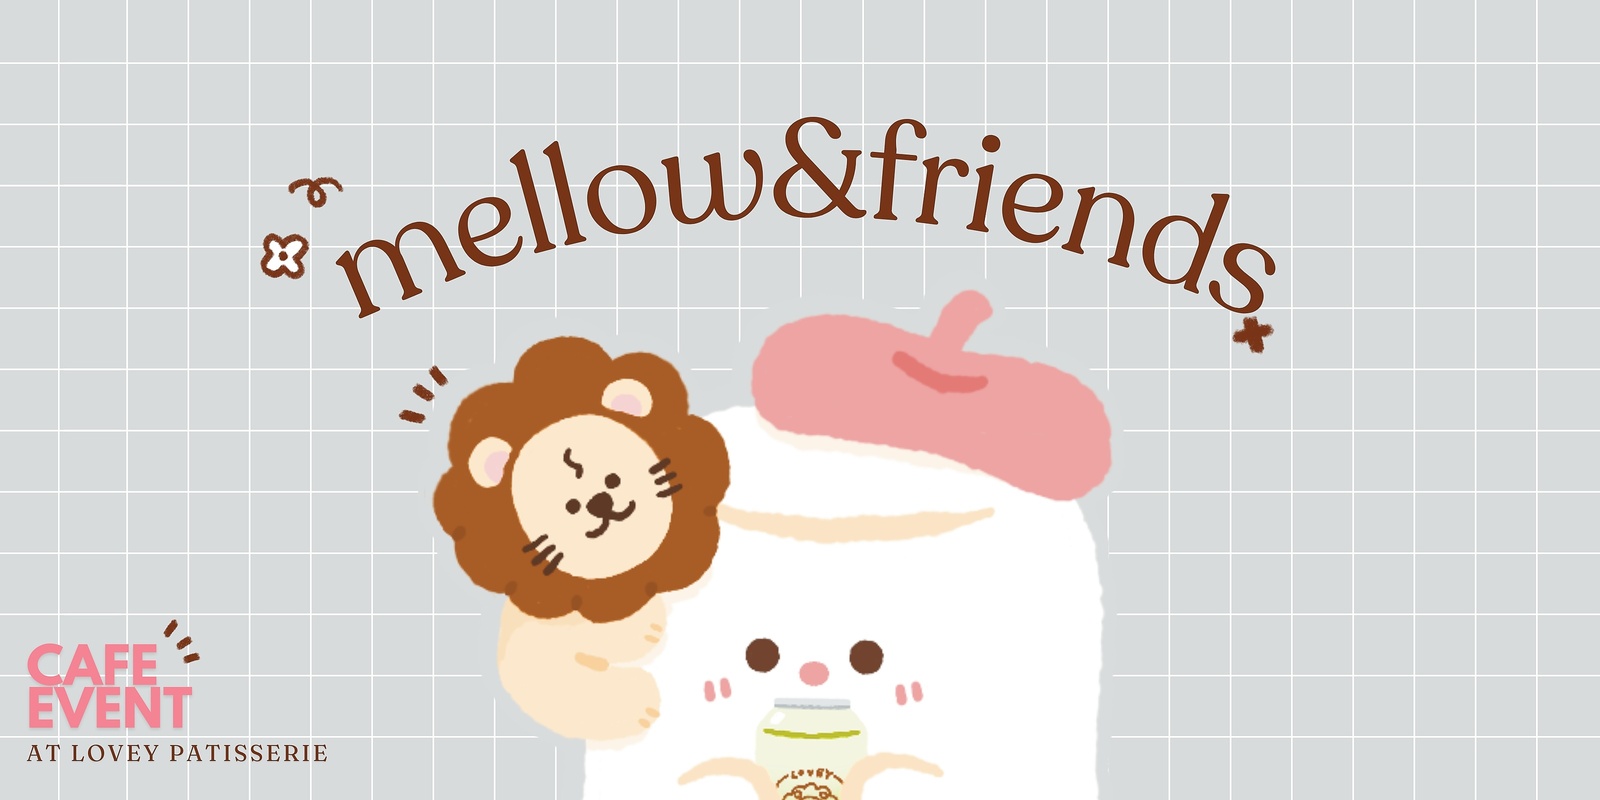 Banner image for Sundays at Lovey Patisserie Cafe - mellow&friends